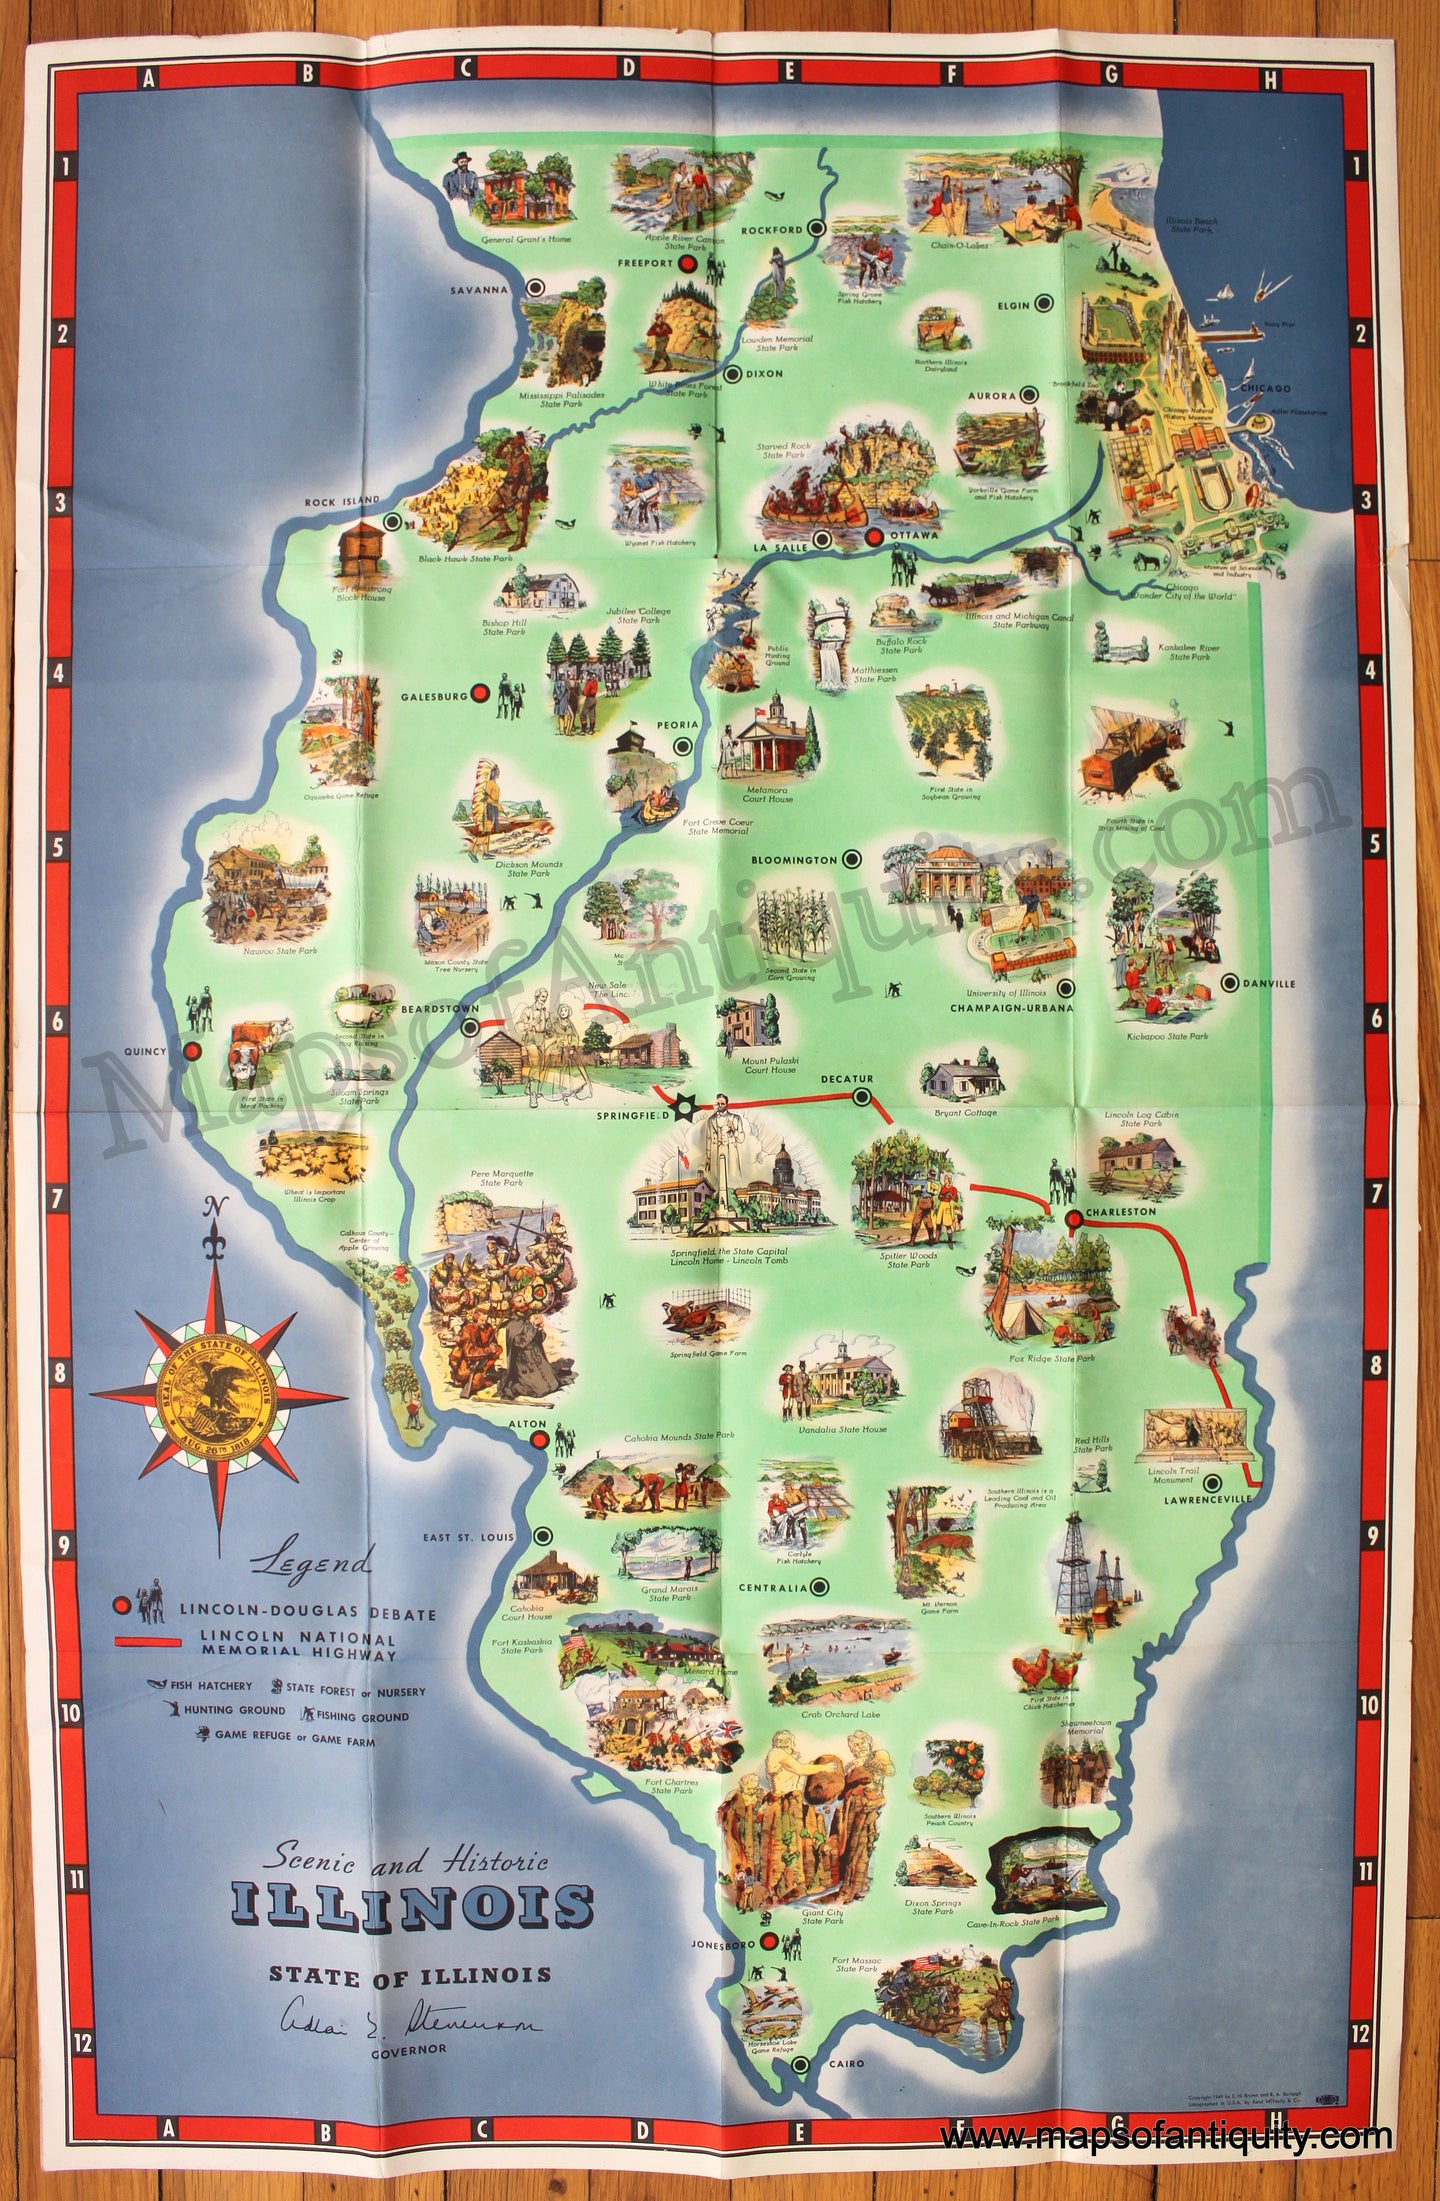 Antique-Printed-Color-Pictorial-Map-Scenic-and-Historic-Illinois-1953-Brown-&-Burleigh-Midwest-Illinois-1900s-20th-century-Maps-of-Antiquity